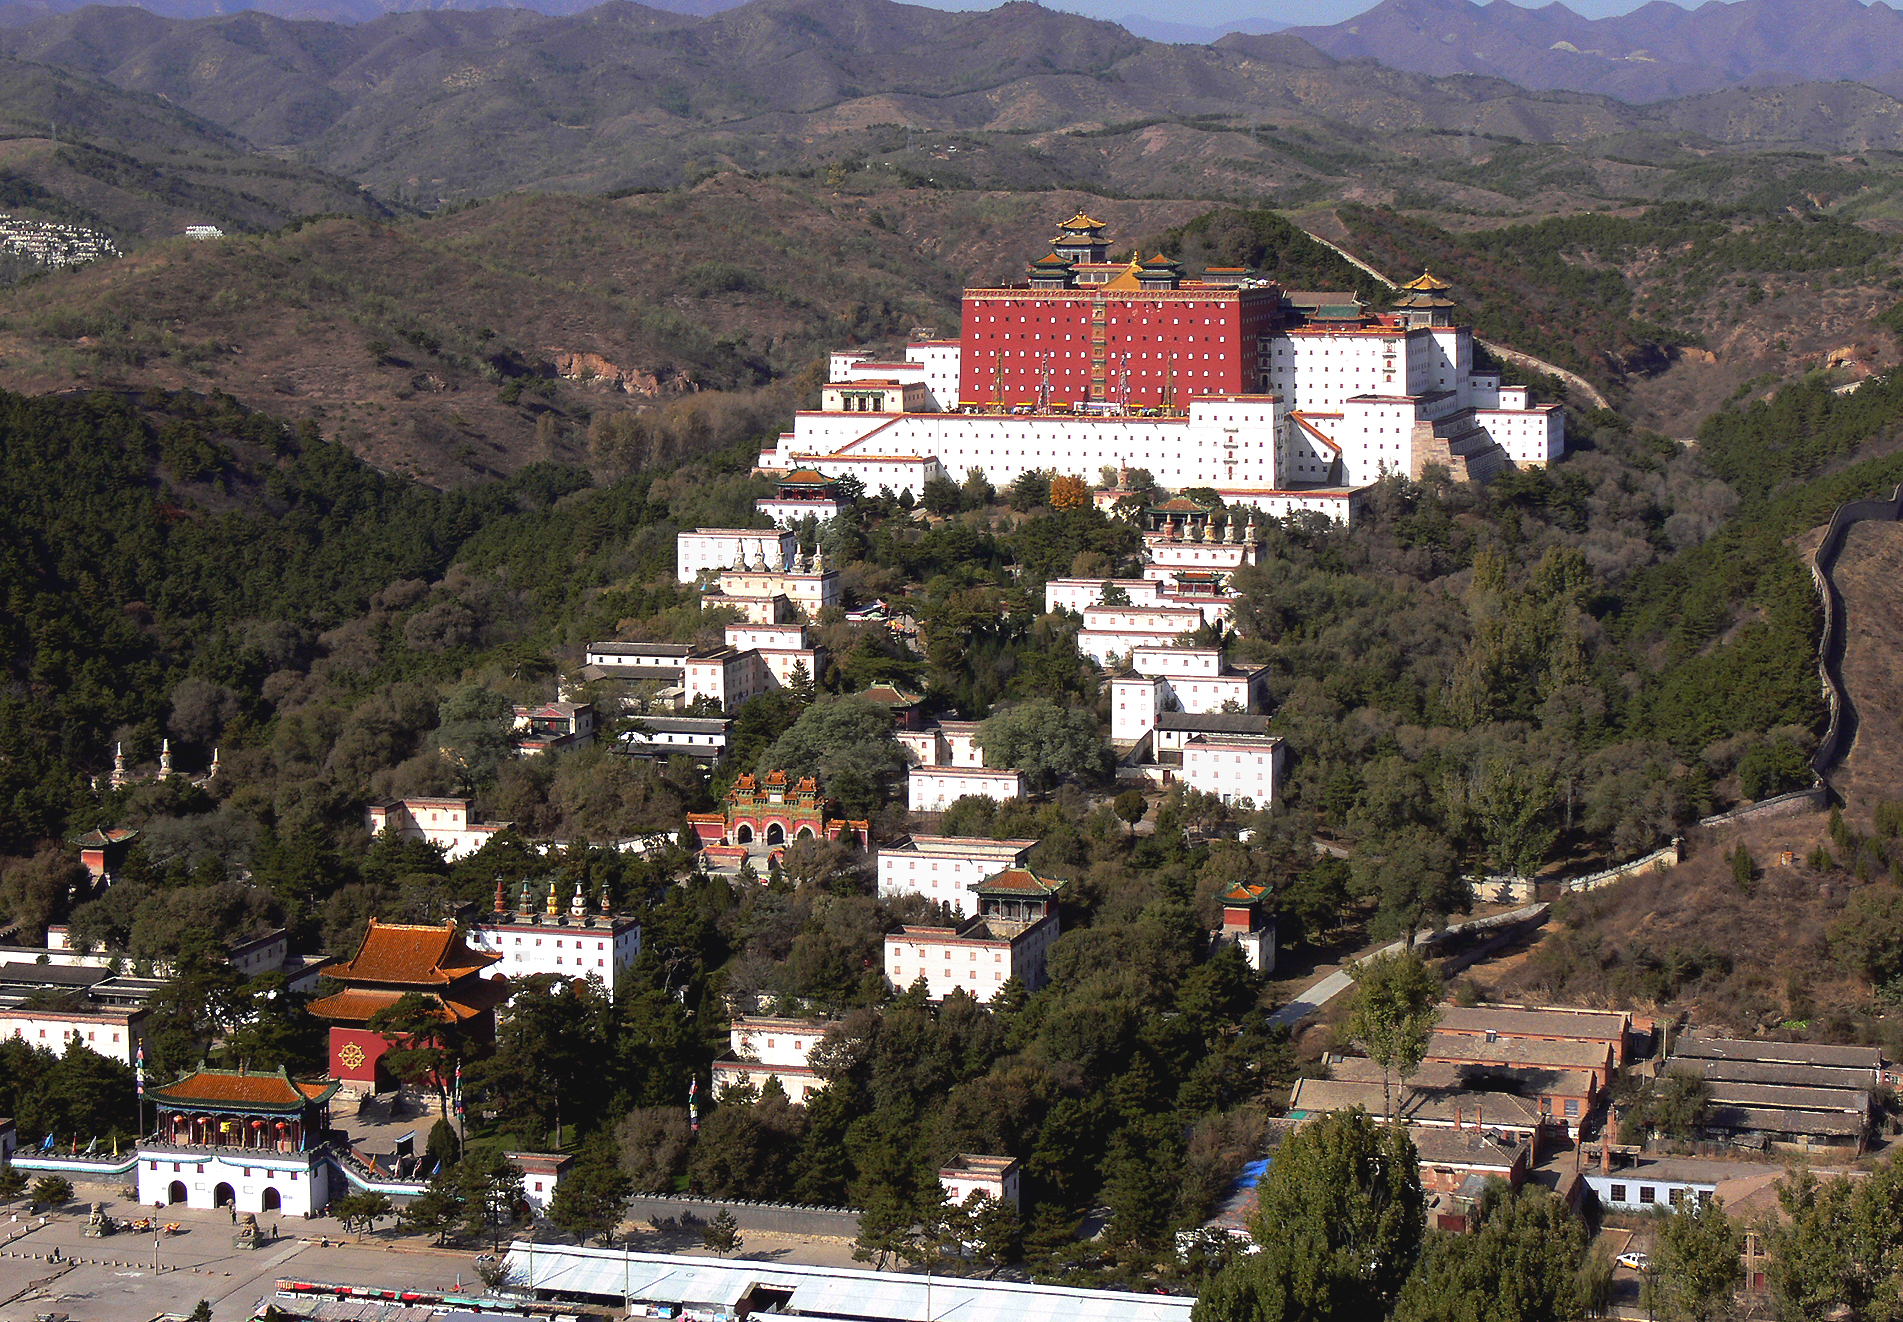 Photograph of hilltop temple featuring red central structure and white outer structure above smaller white buildings